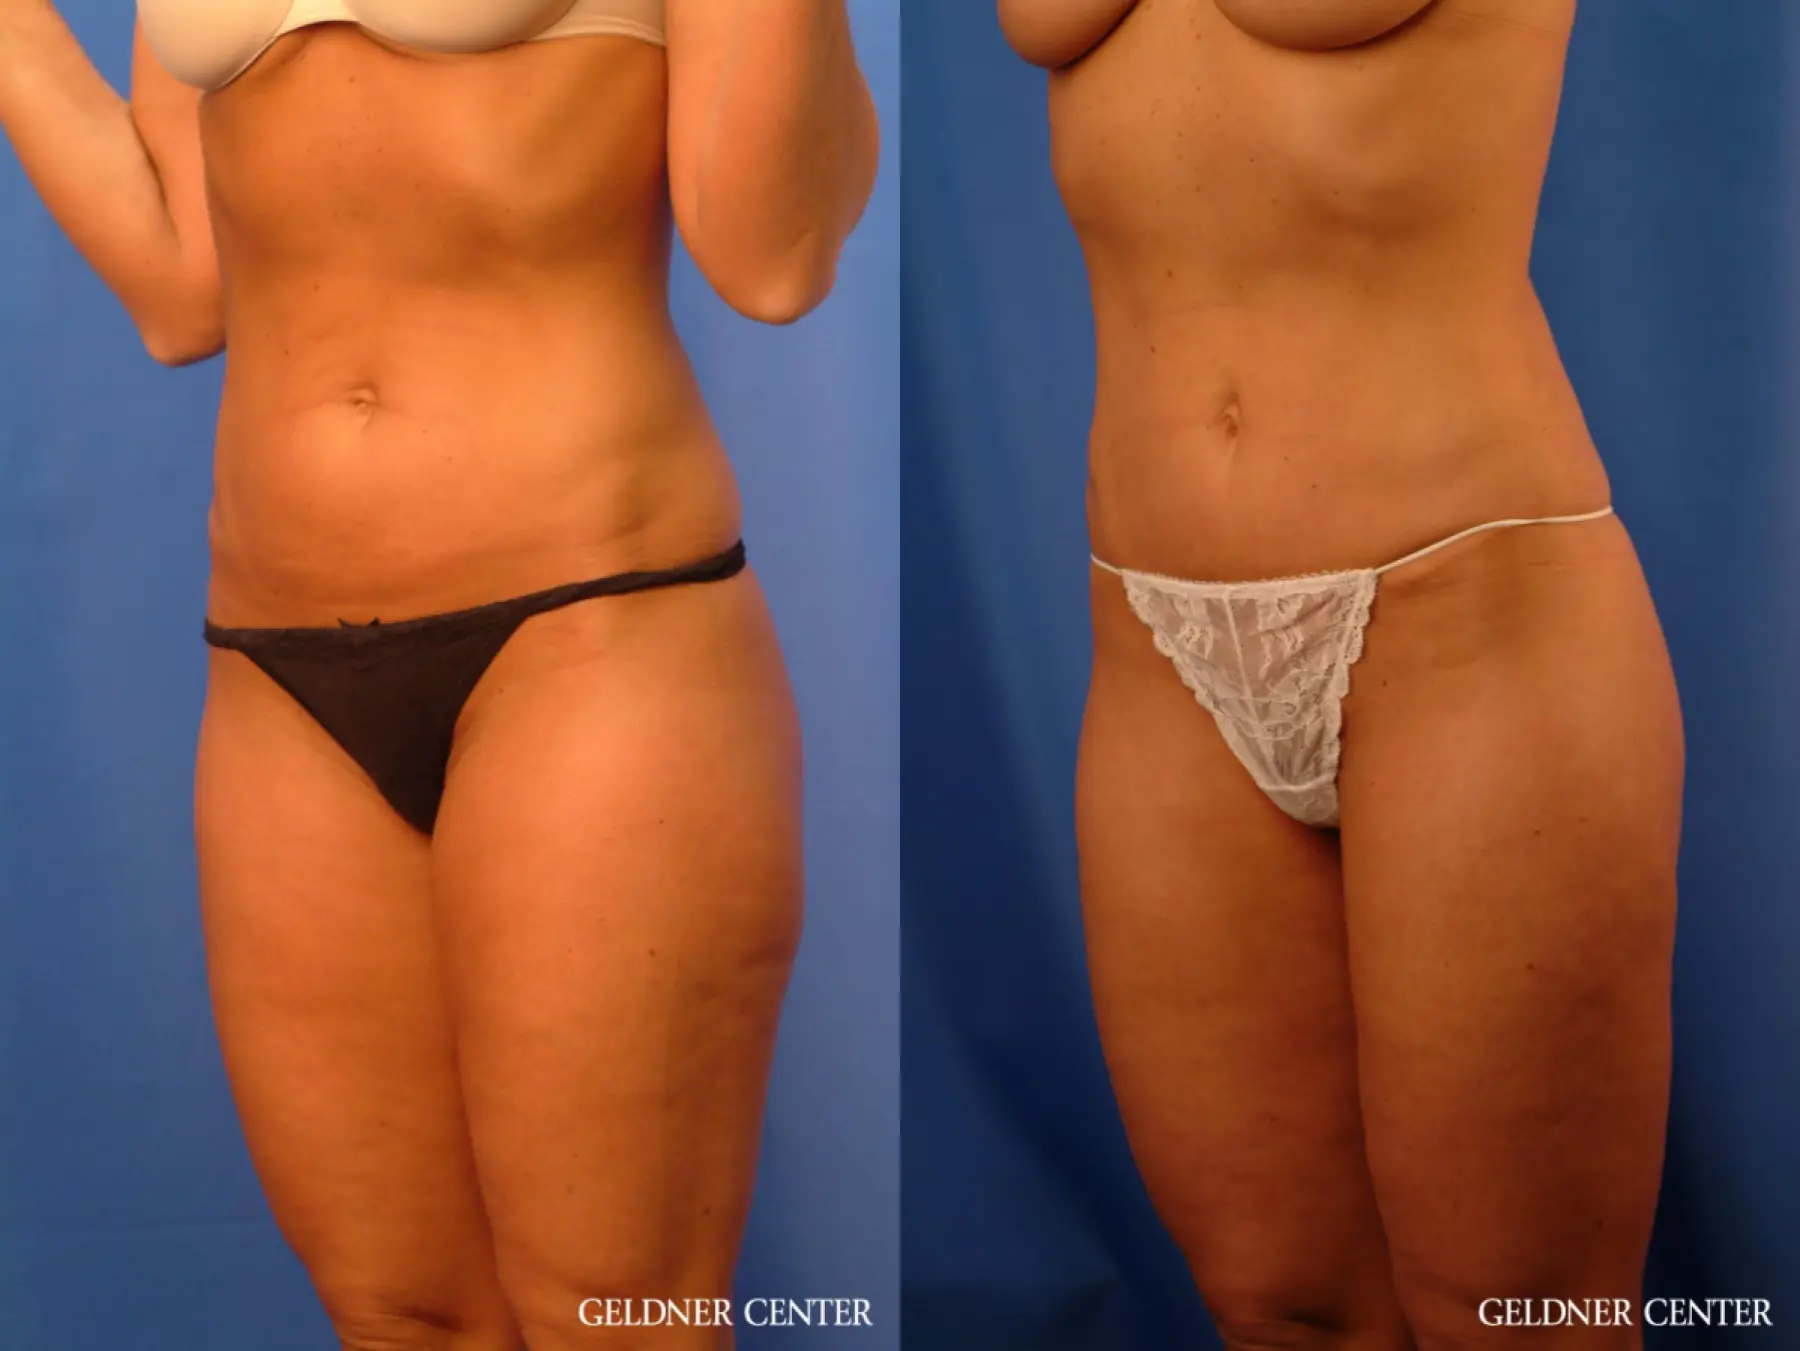 Vaser lipo patient 2624 before and after photos - Before and After 5